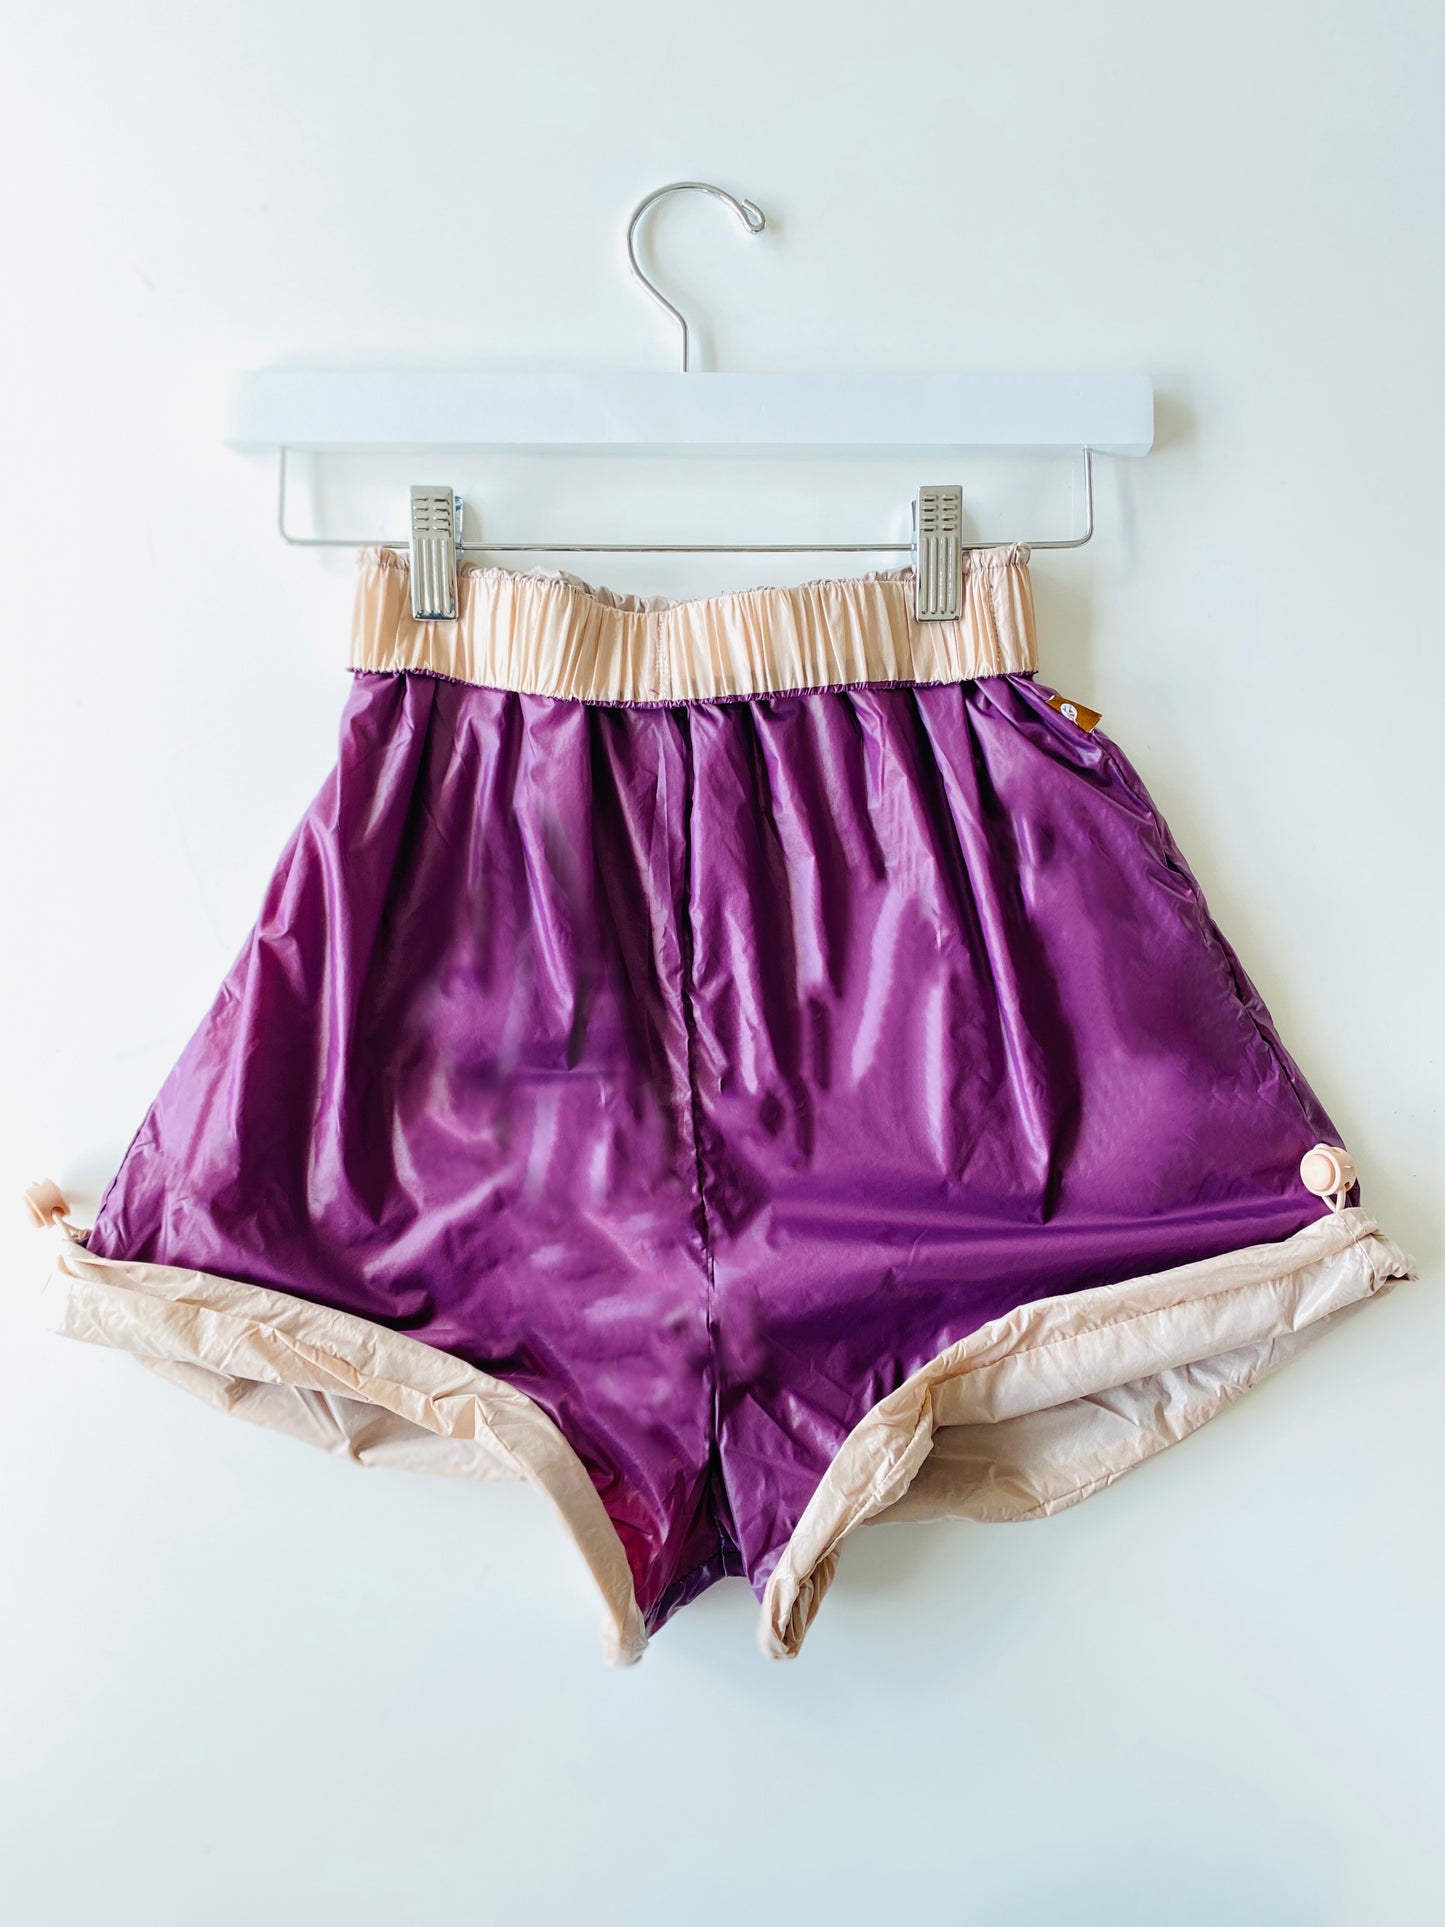 Trash Bag Shorts in purple and beige from The Collective Dancewear